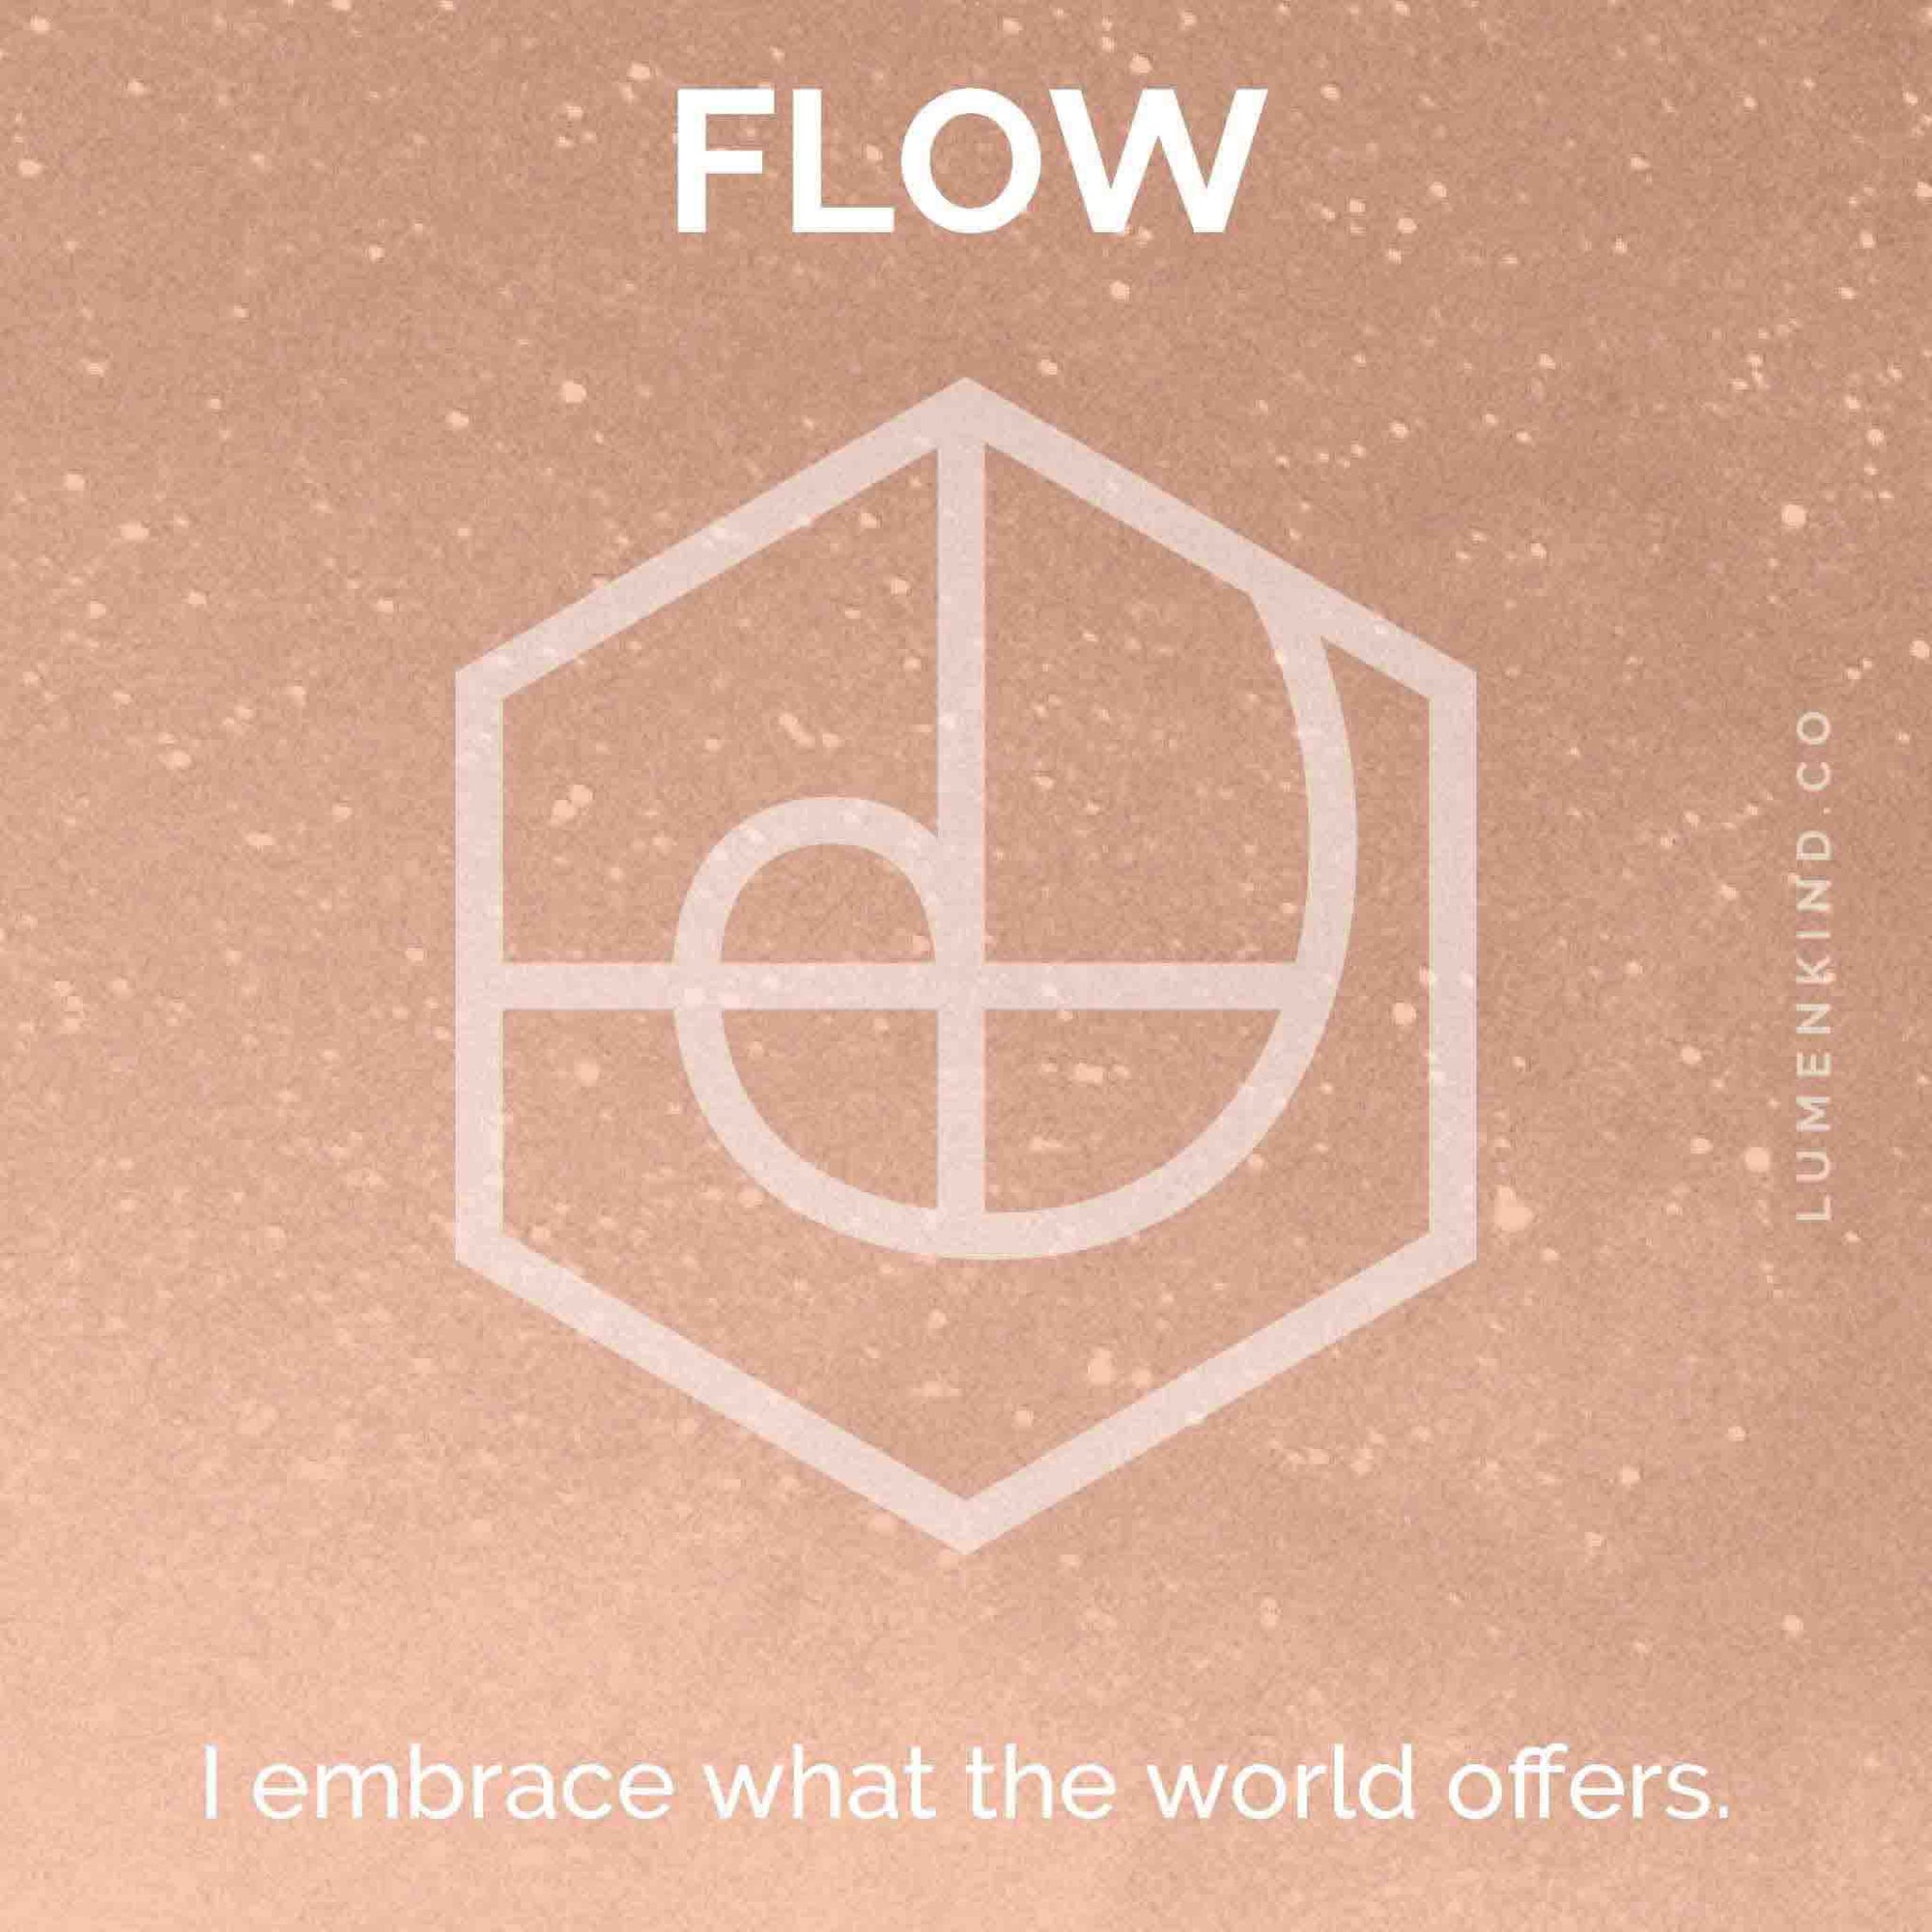 2.0 The suggested intention is FLOW. I embrace what the world offers.